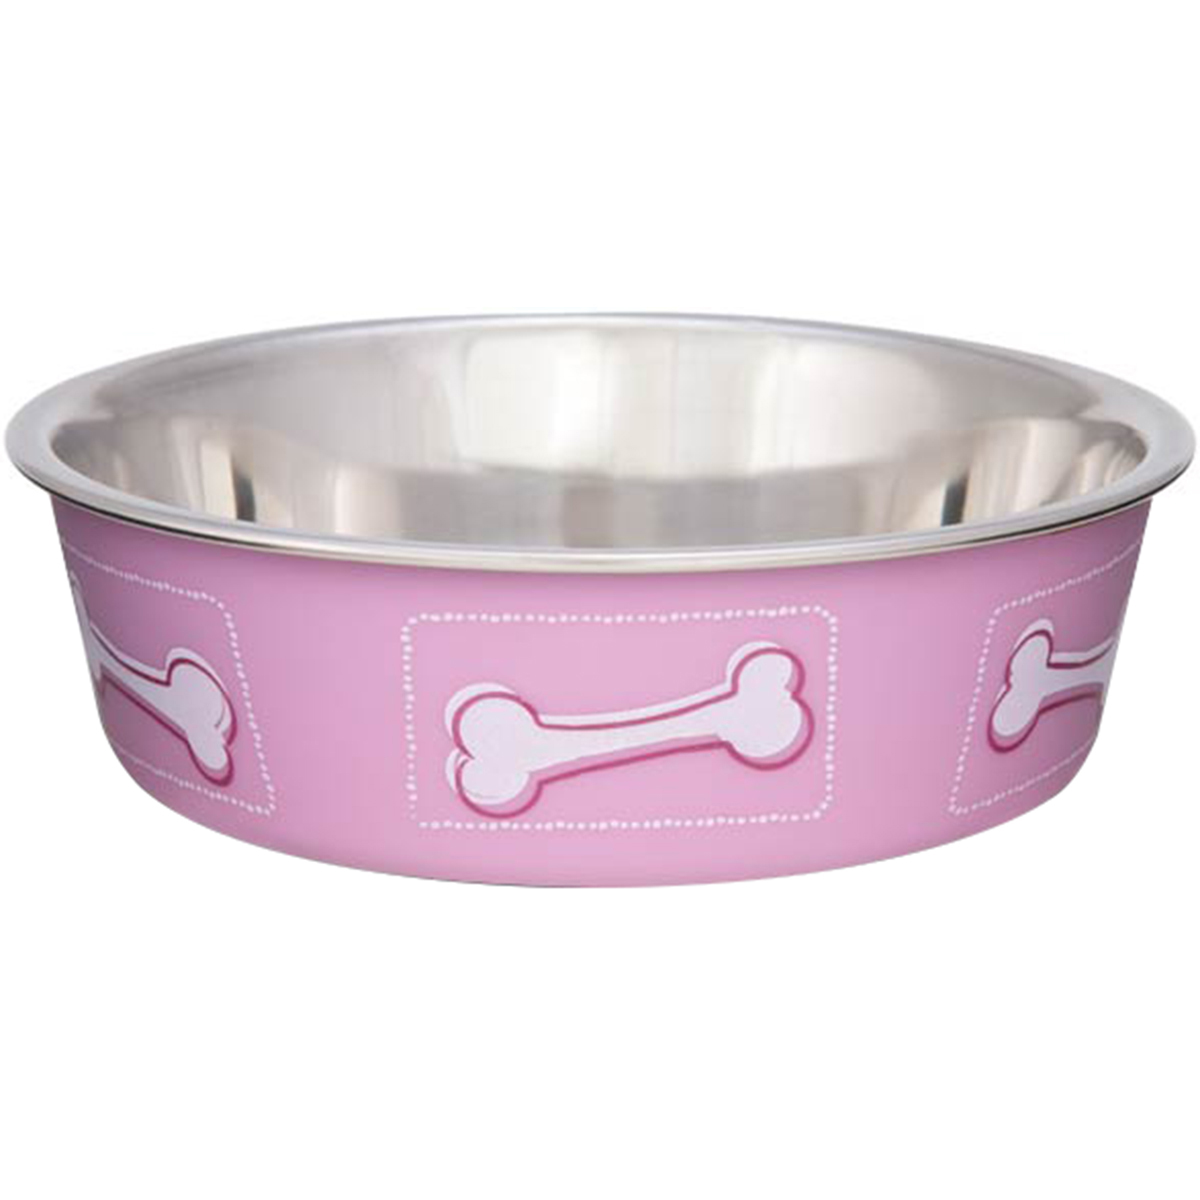 Picture of Loving Pets Products LP7510 Bella Bowl Coastal, Small, Pink